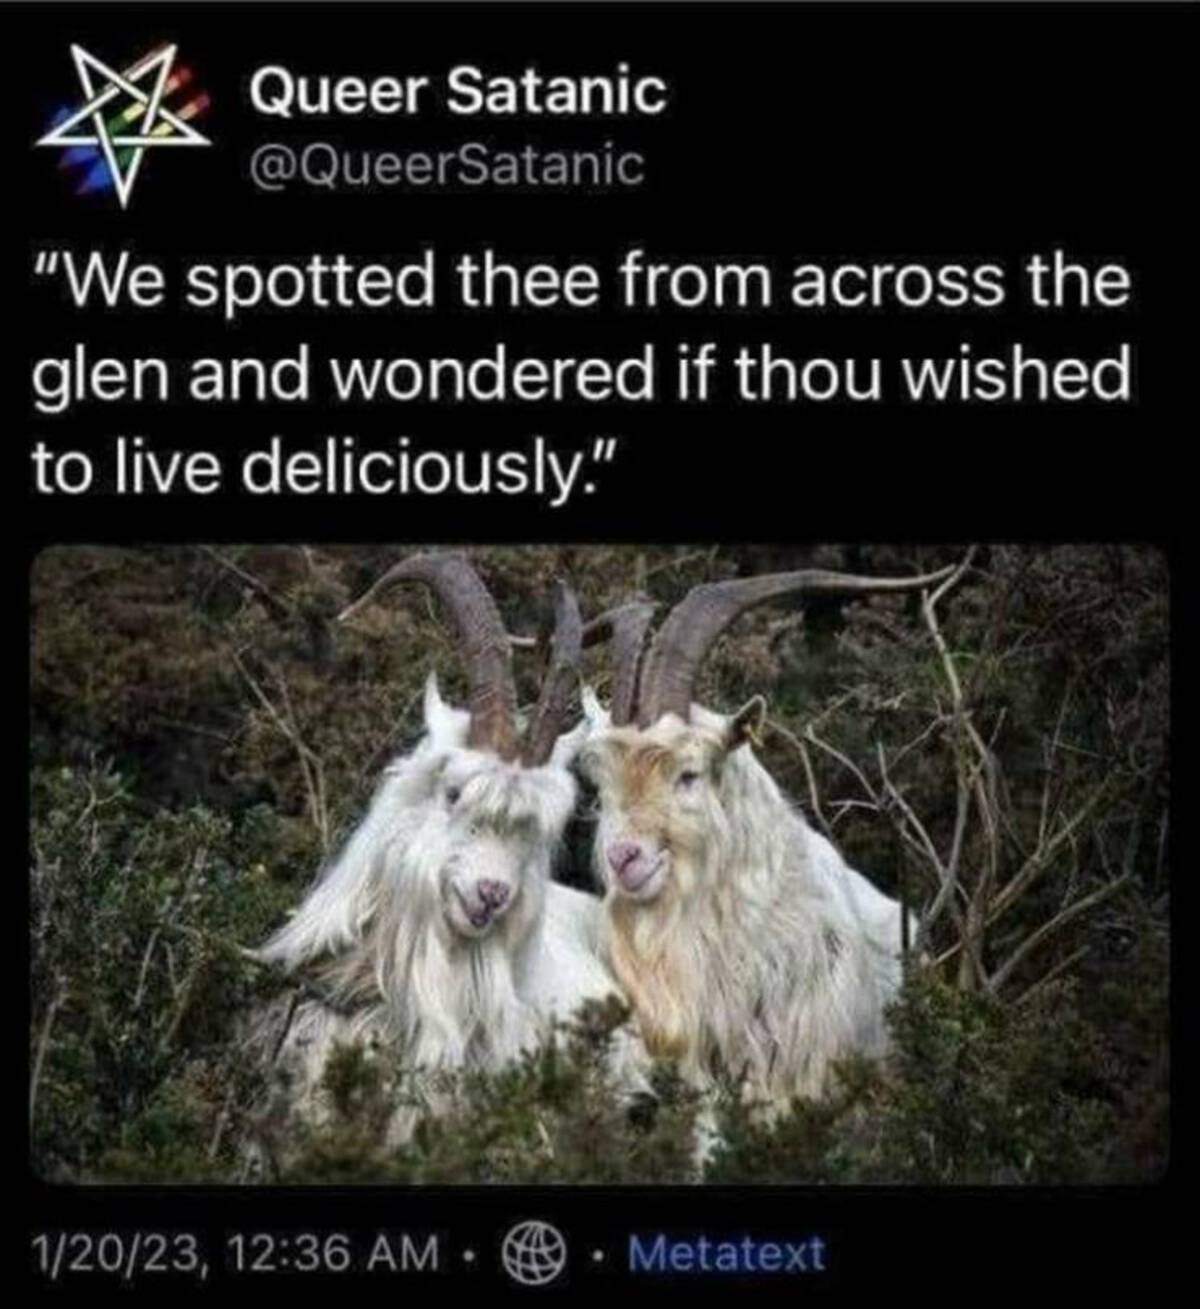 cashmere goat - Queer Satanic "We spotted thee from across the glen and wondered if thou wished to live deliciously." 12023, Metatext